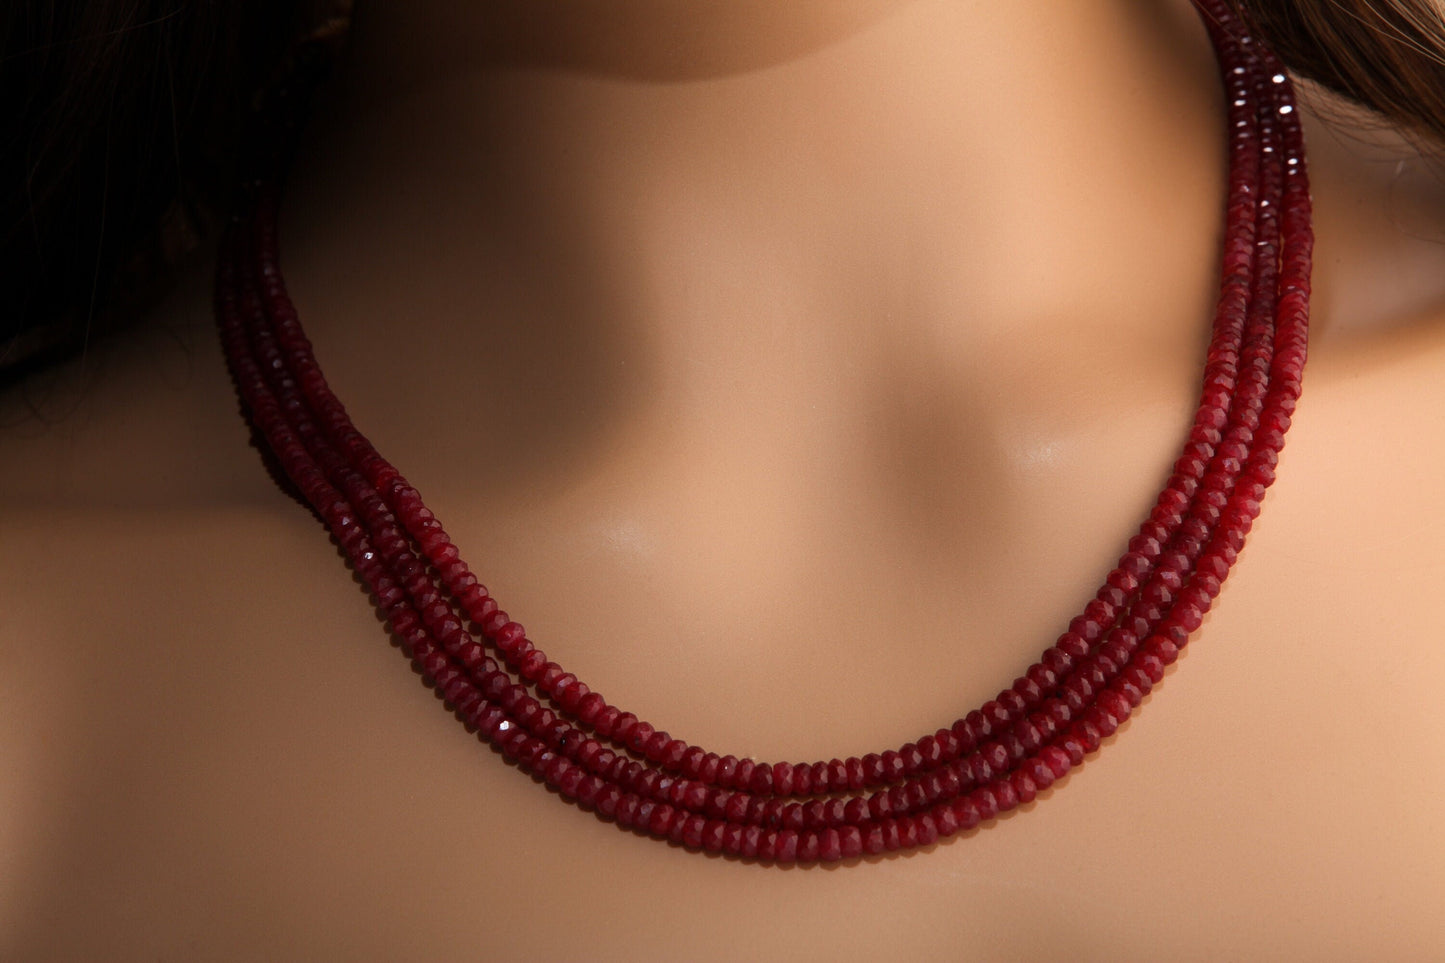 AAA Natural Ruby Gemstones 4-4.5mm Multi Strand, 3 Line Layer Gemstone Rondelle Necklace 15.5&quot; Plus 9&quot; Adjustable Thread. 270Ct